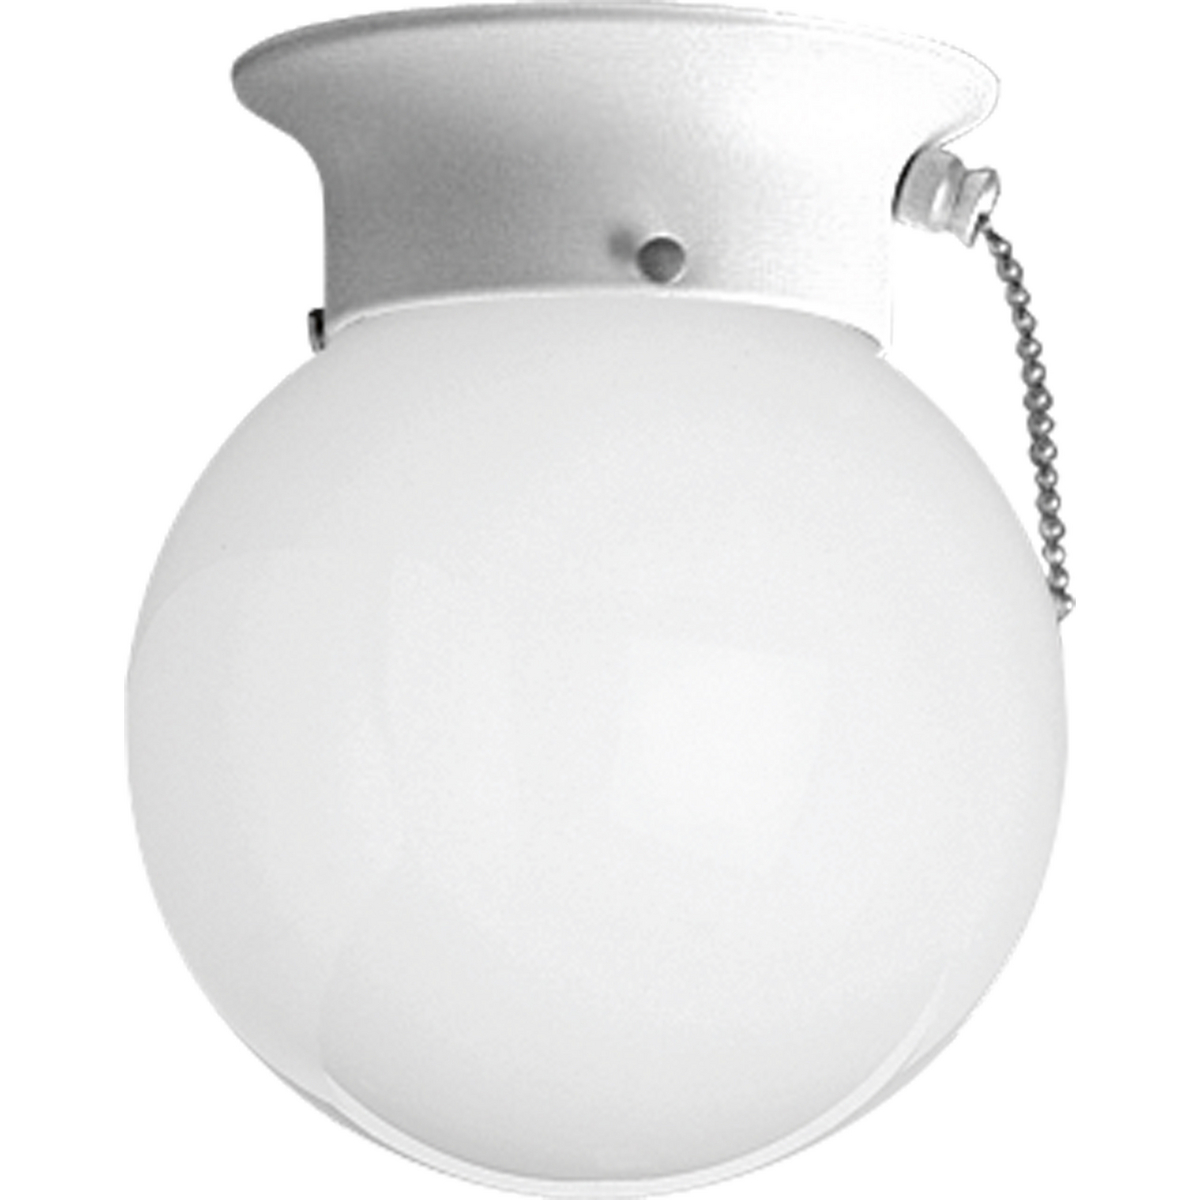 Flush mount ceiling fixture with white glass globe and pull chain. Pull chain switch included. Globe held in place with three thumb screws.